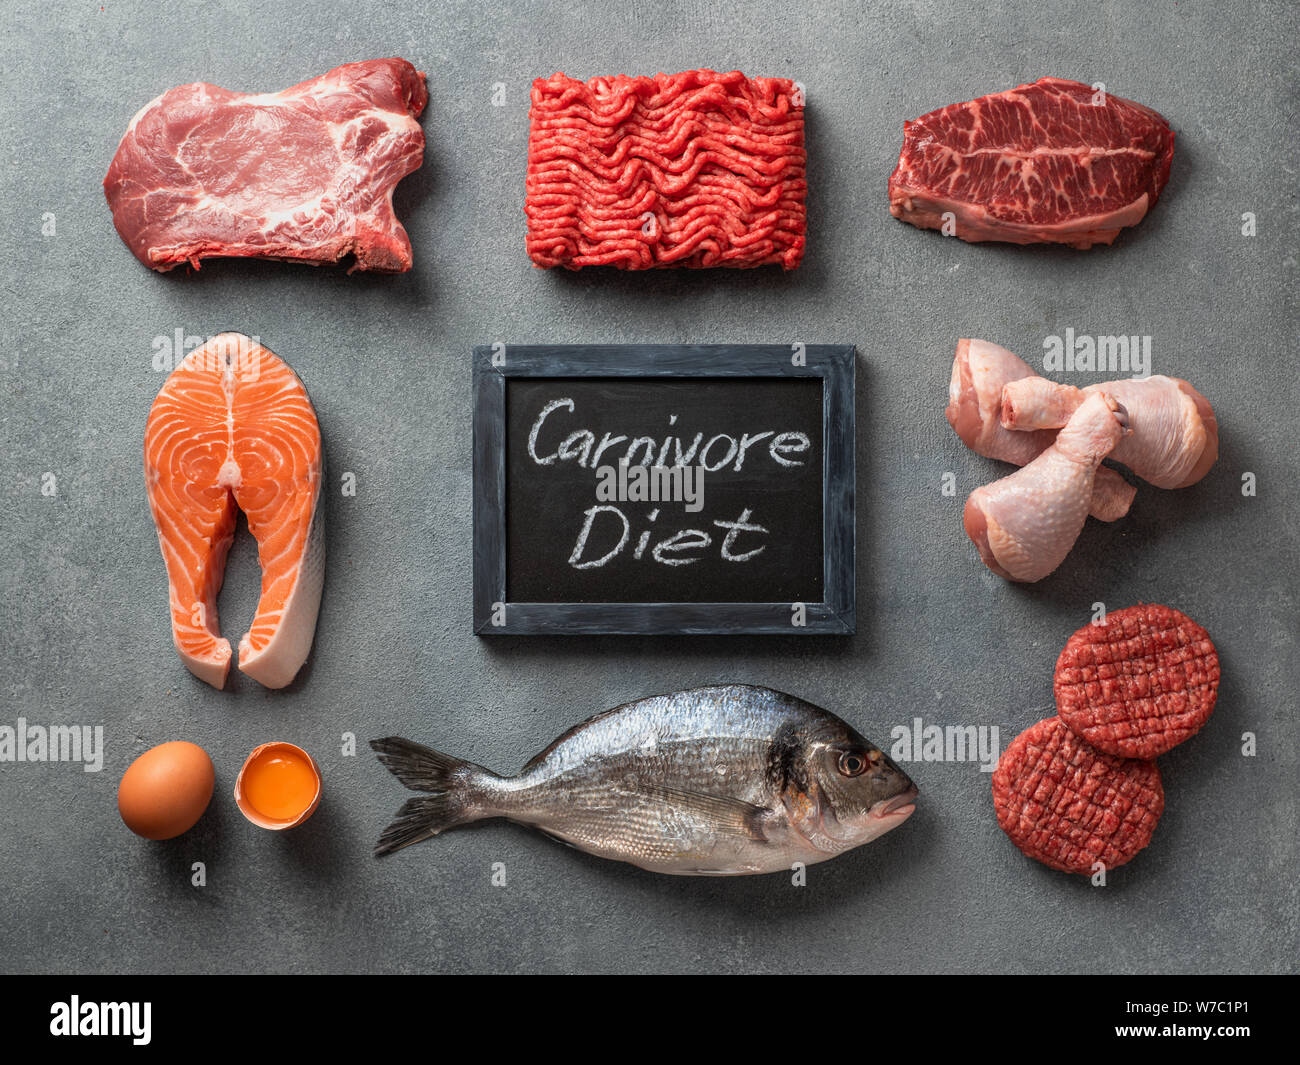 Carnivore diet concept. Raw ingredients for zero carb diet - meat, poultry, fish, seafood, eggs, beef bones for bone broth and words Carnivore Diet on gray stone background. Top view or flat lay. Stock Photo